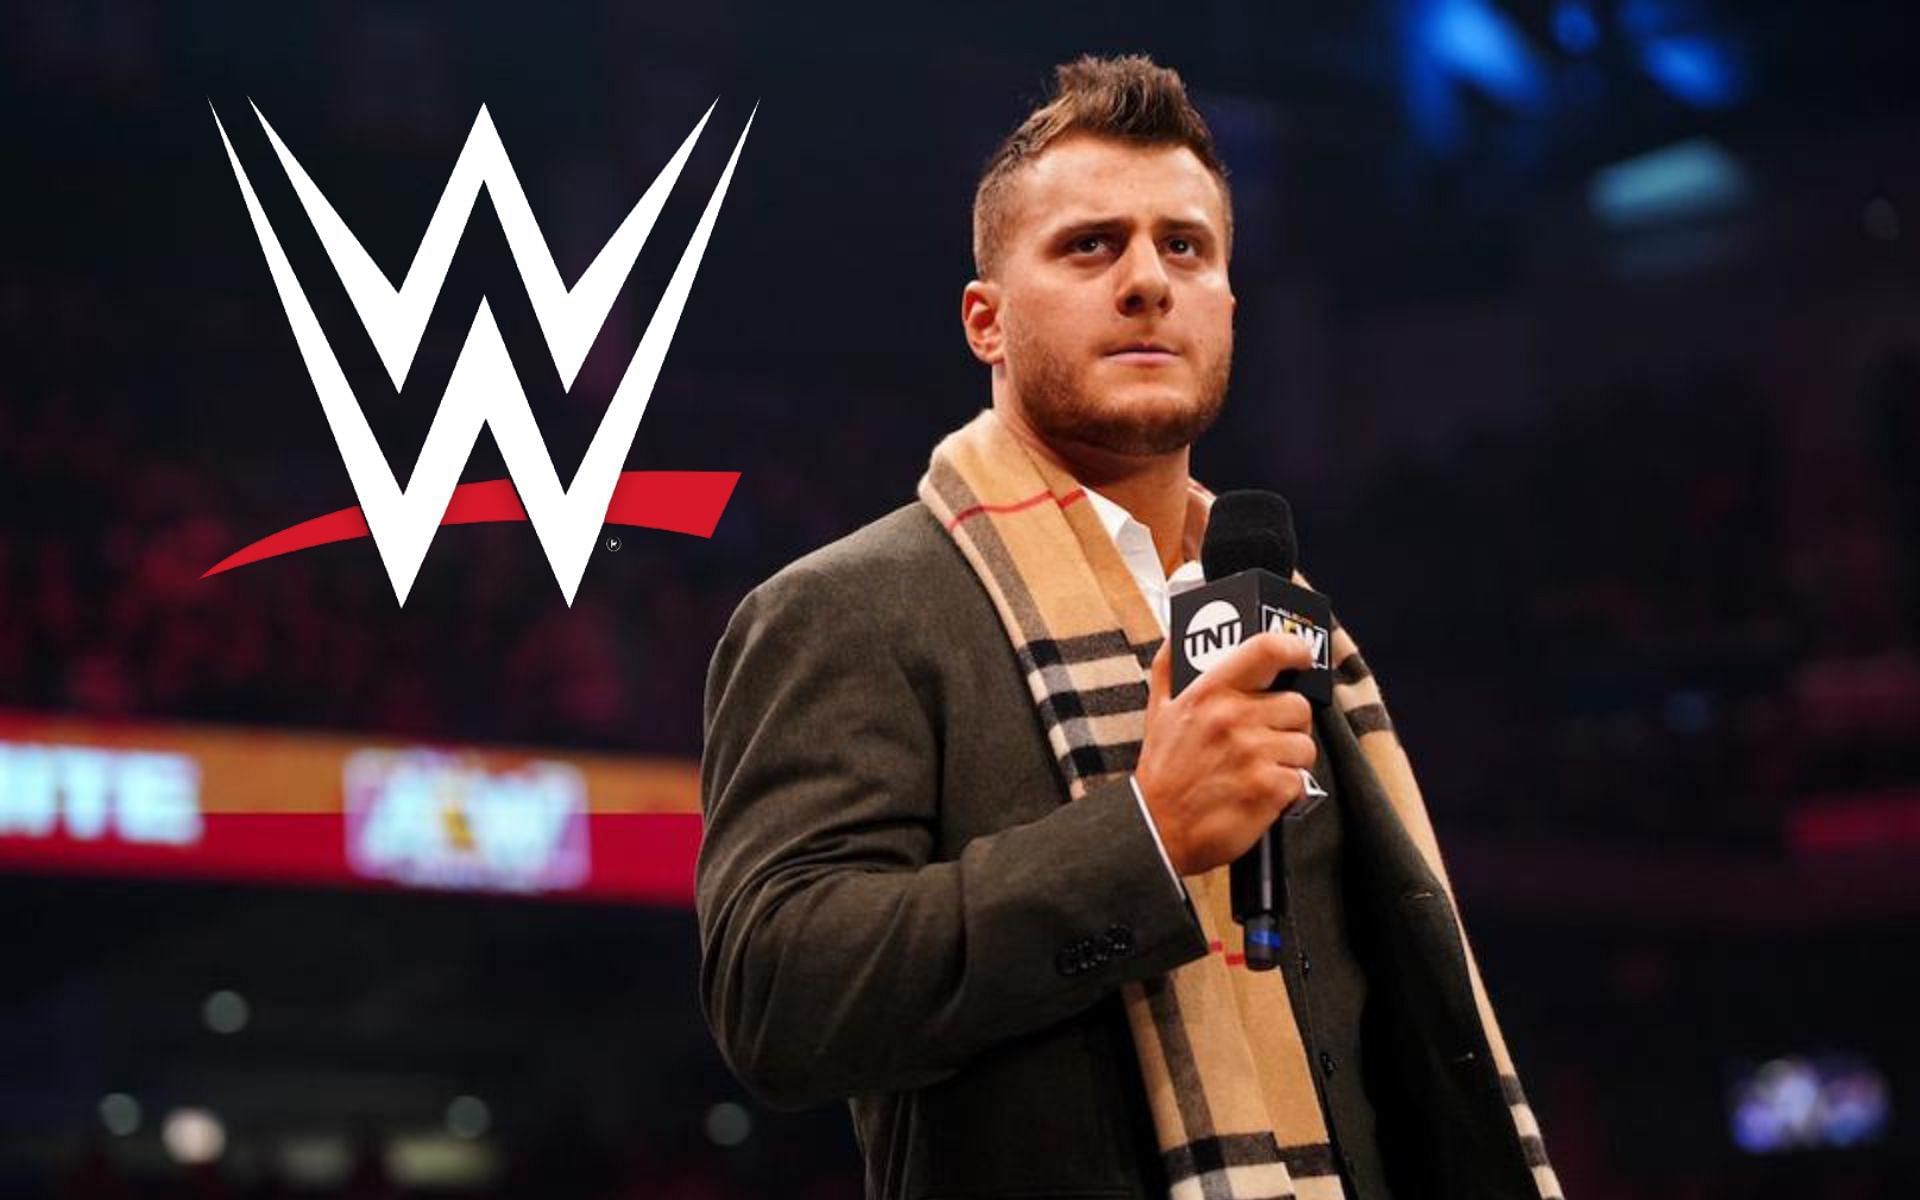 MJF is in his first reign as AEW World Champion